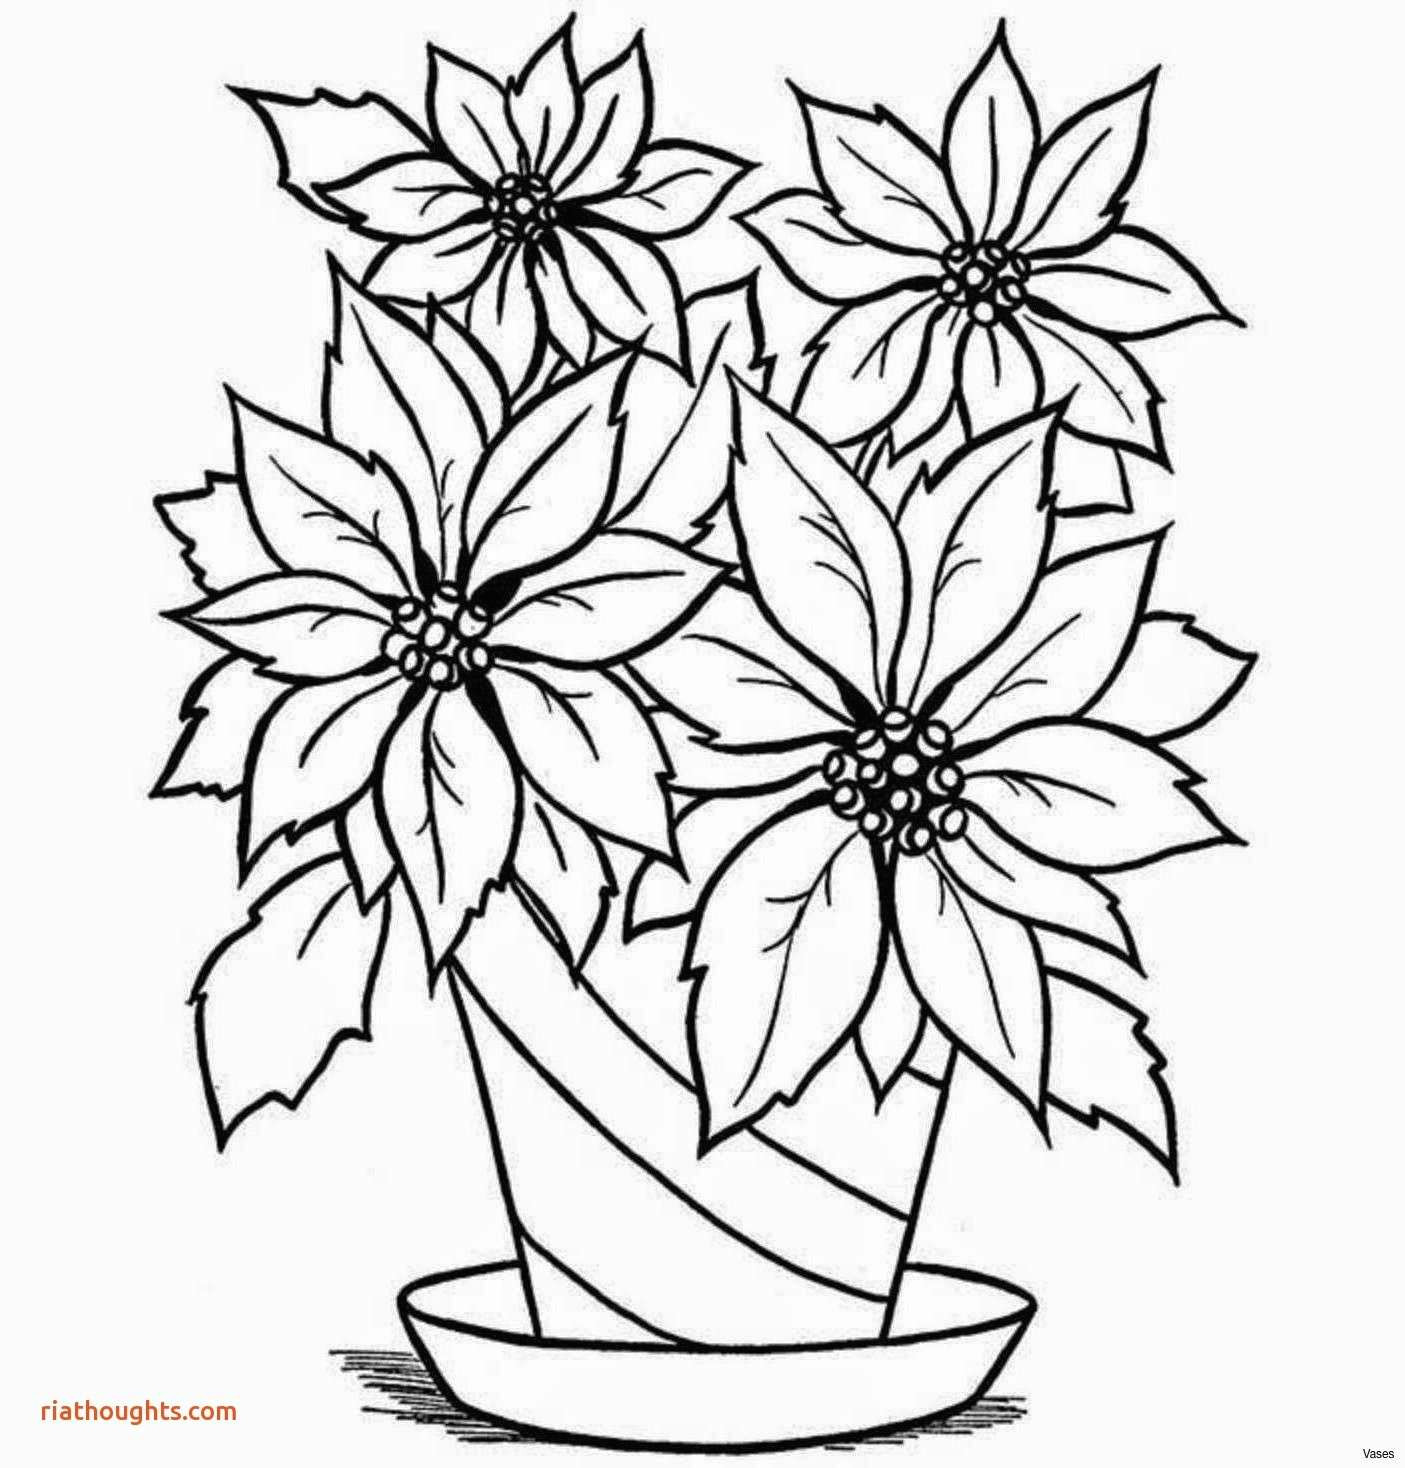 Drawing Of Flower Vase with Design 25 Fancy Draw A Flower Helpsite Us